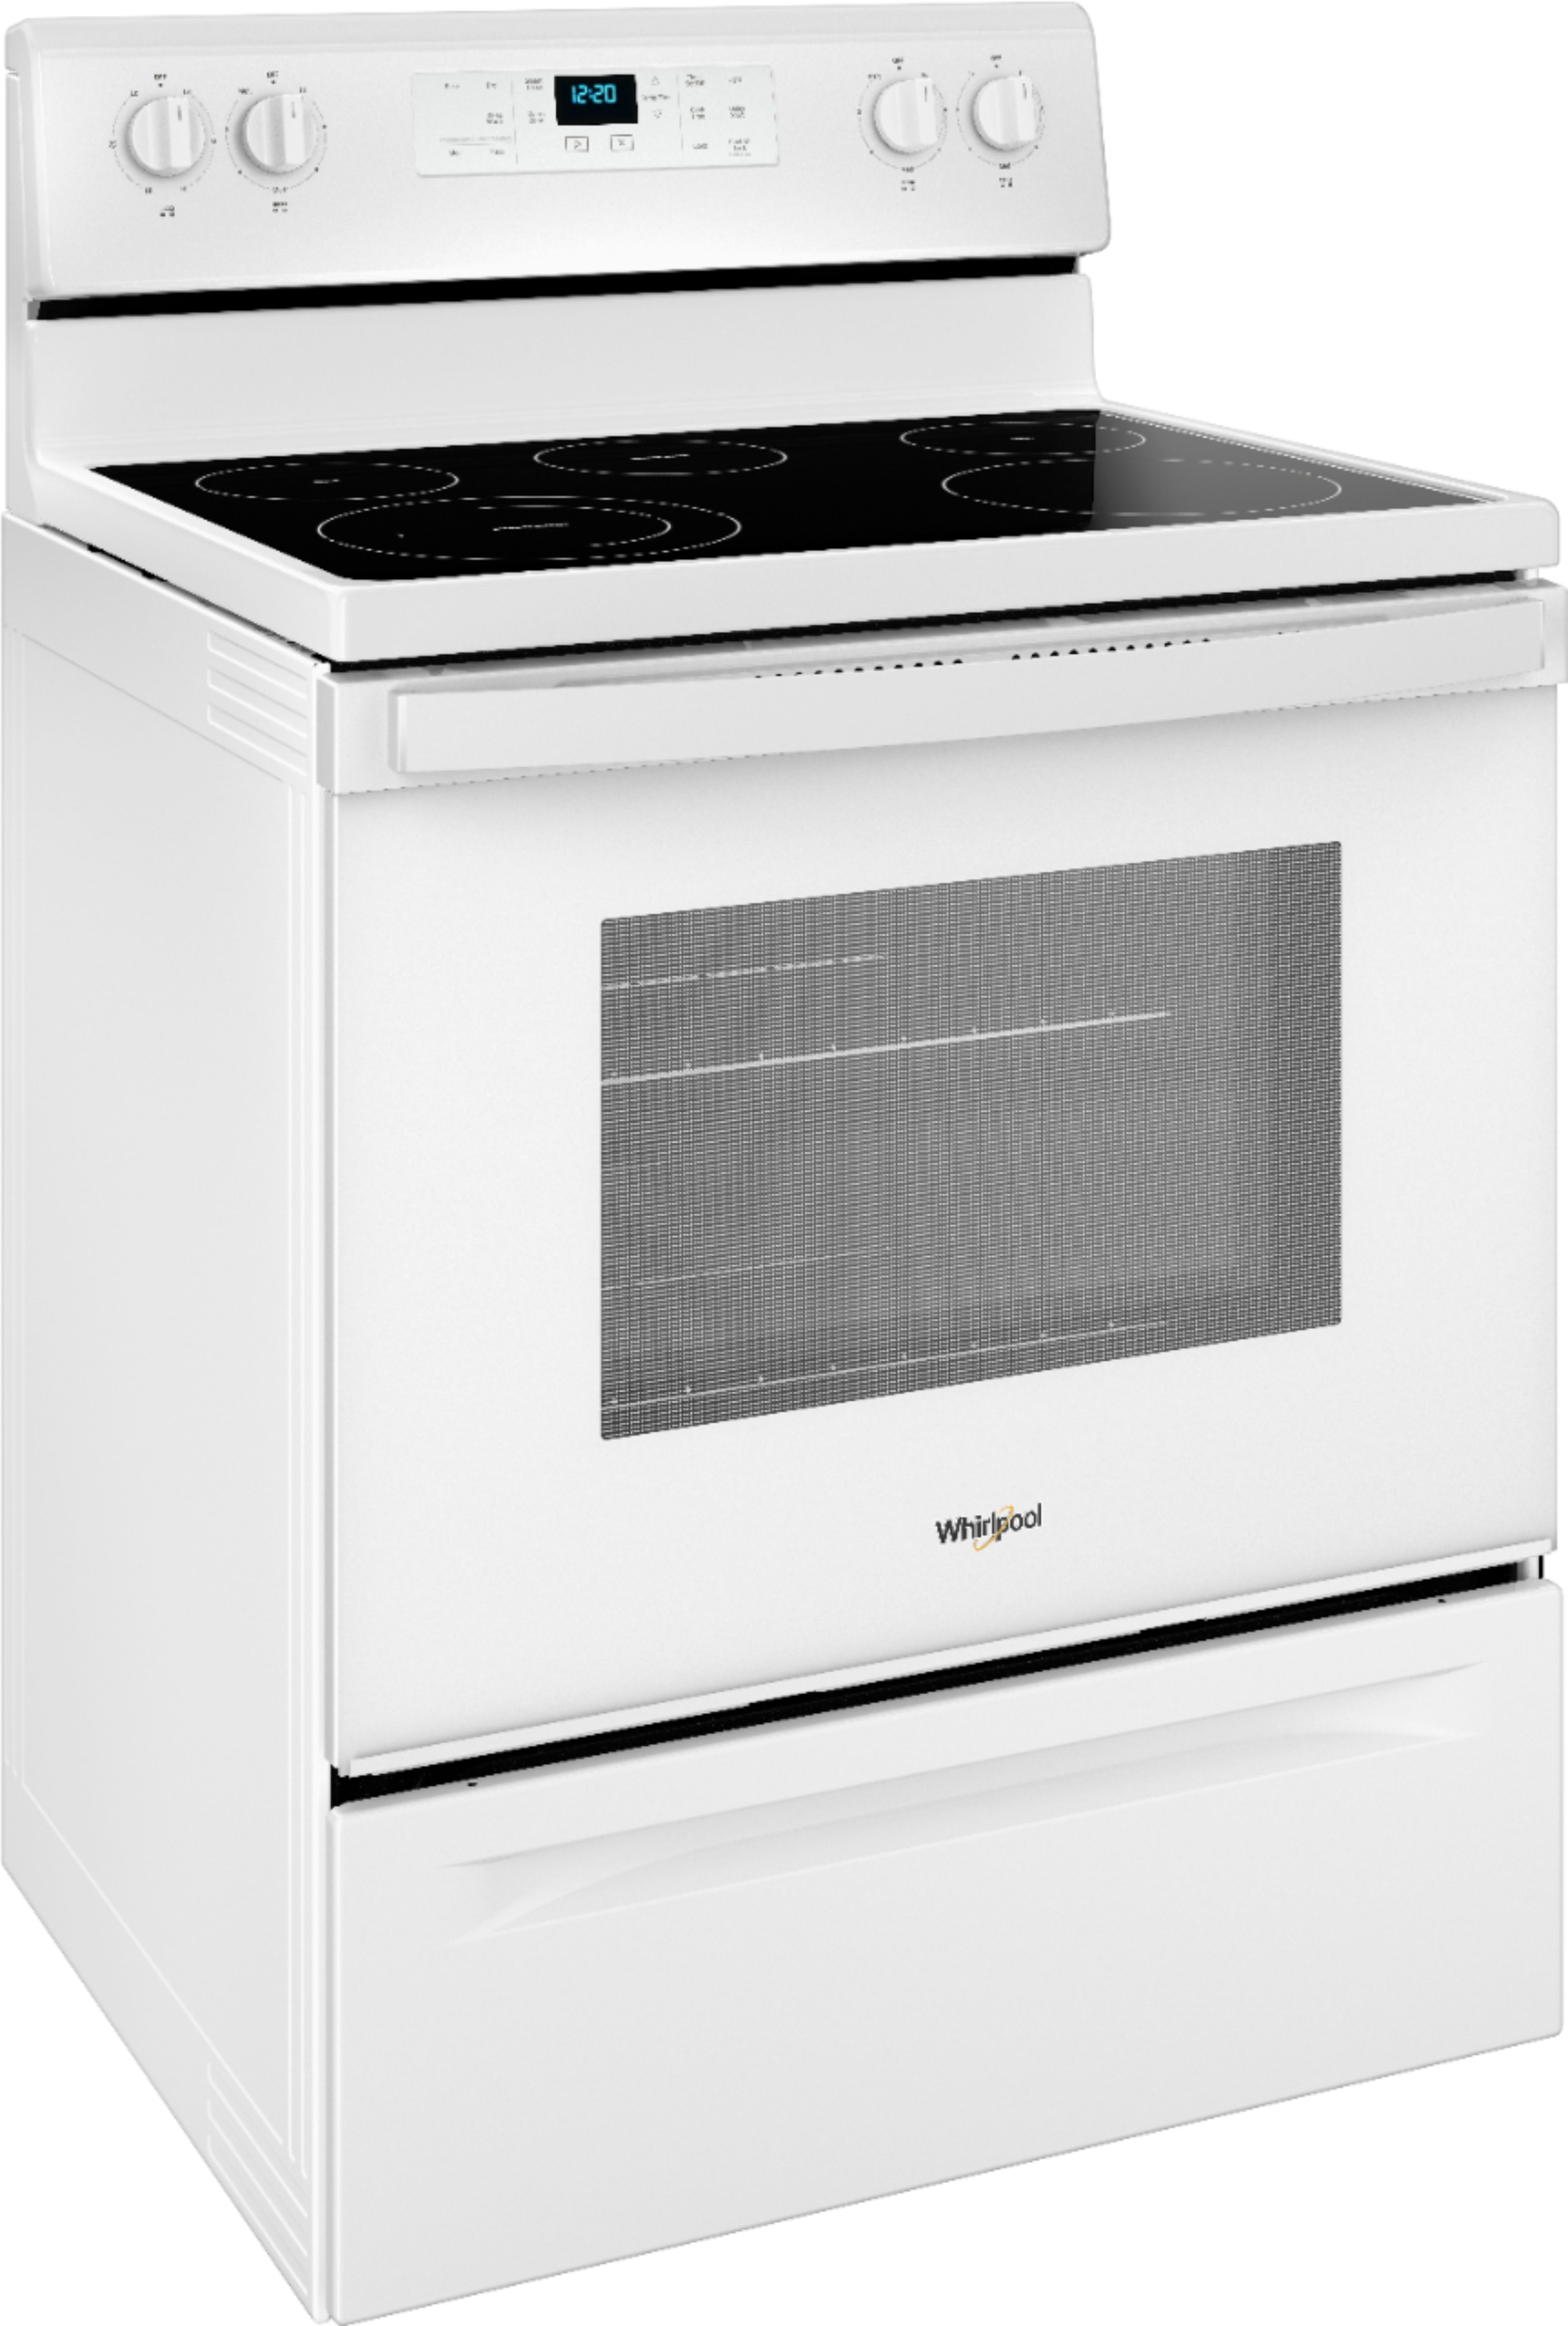 Angle View: Hotpoint - 5.0 Cu. Ft. Freestanding Electric Range - Black